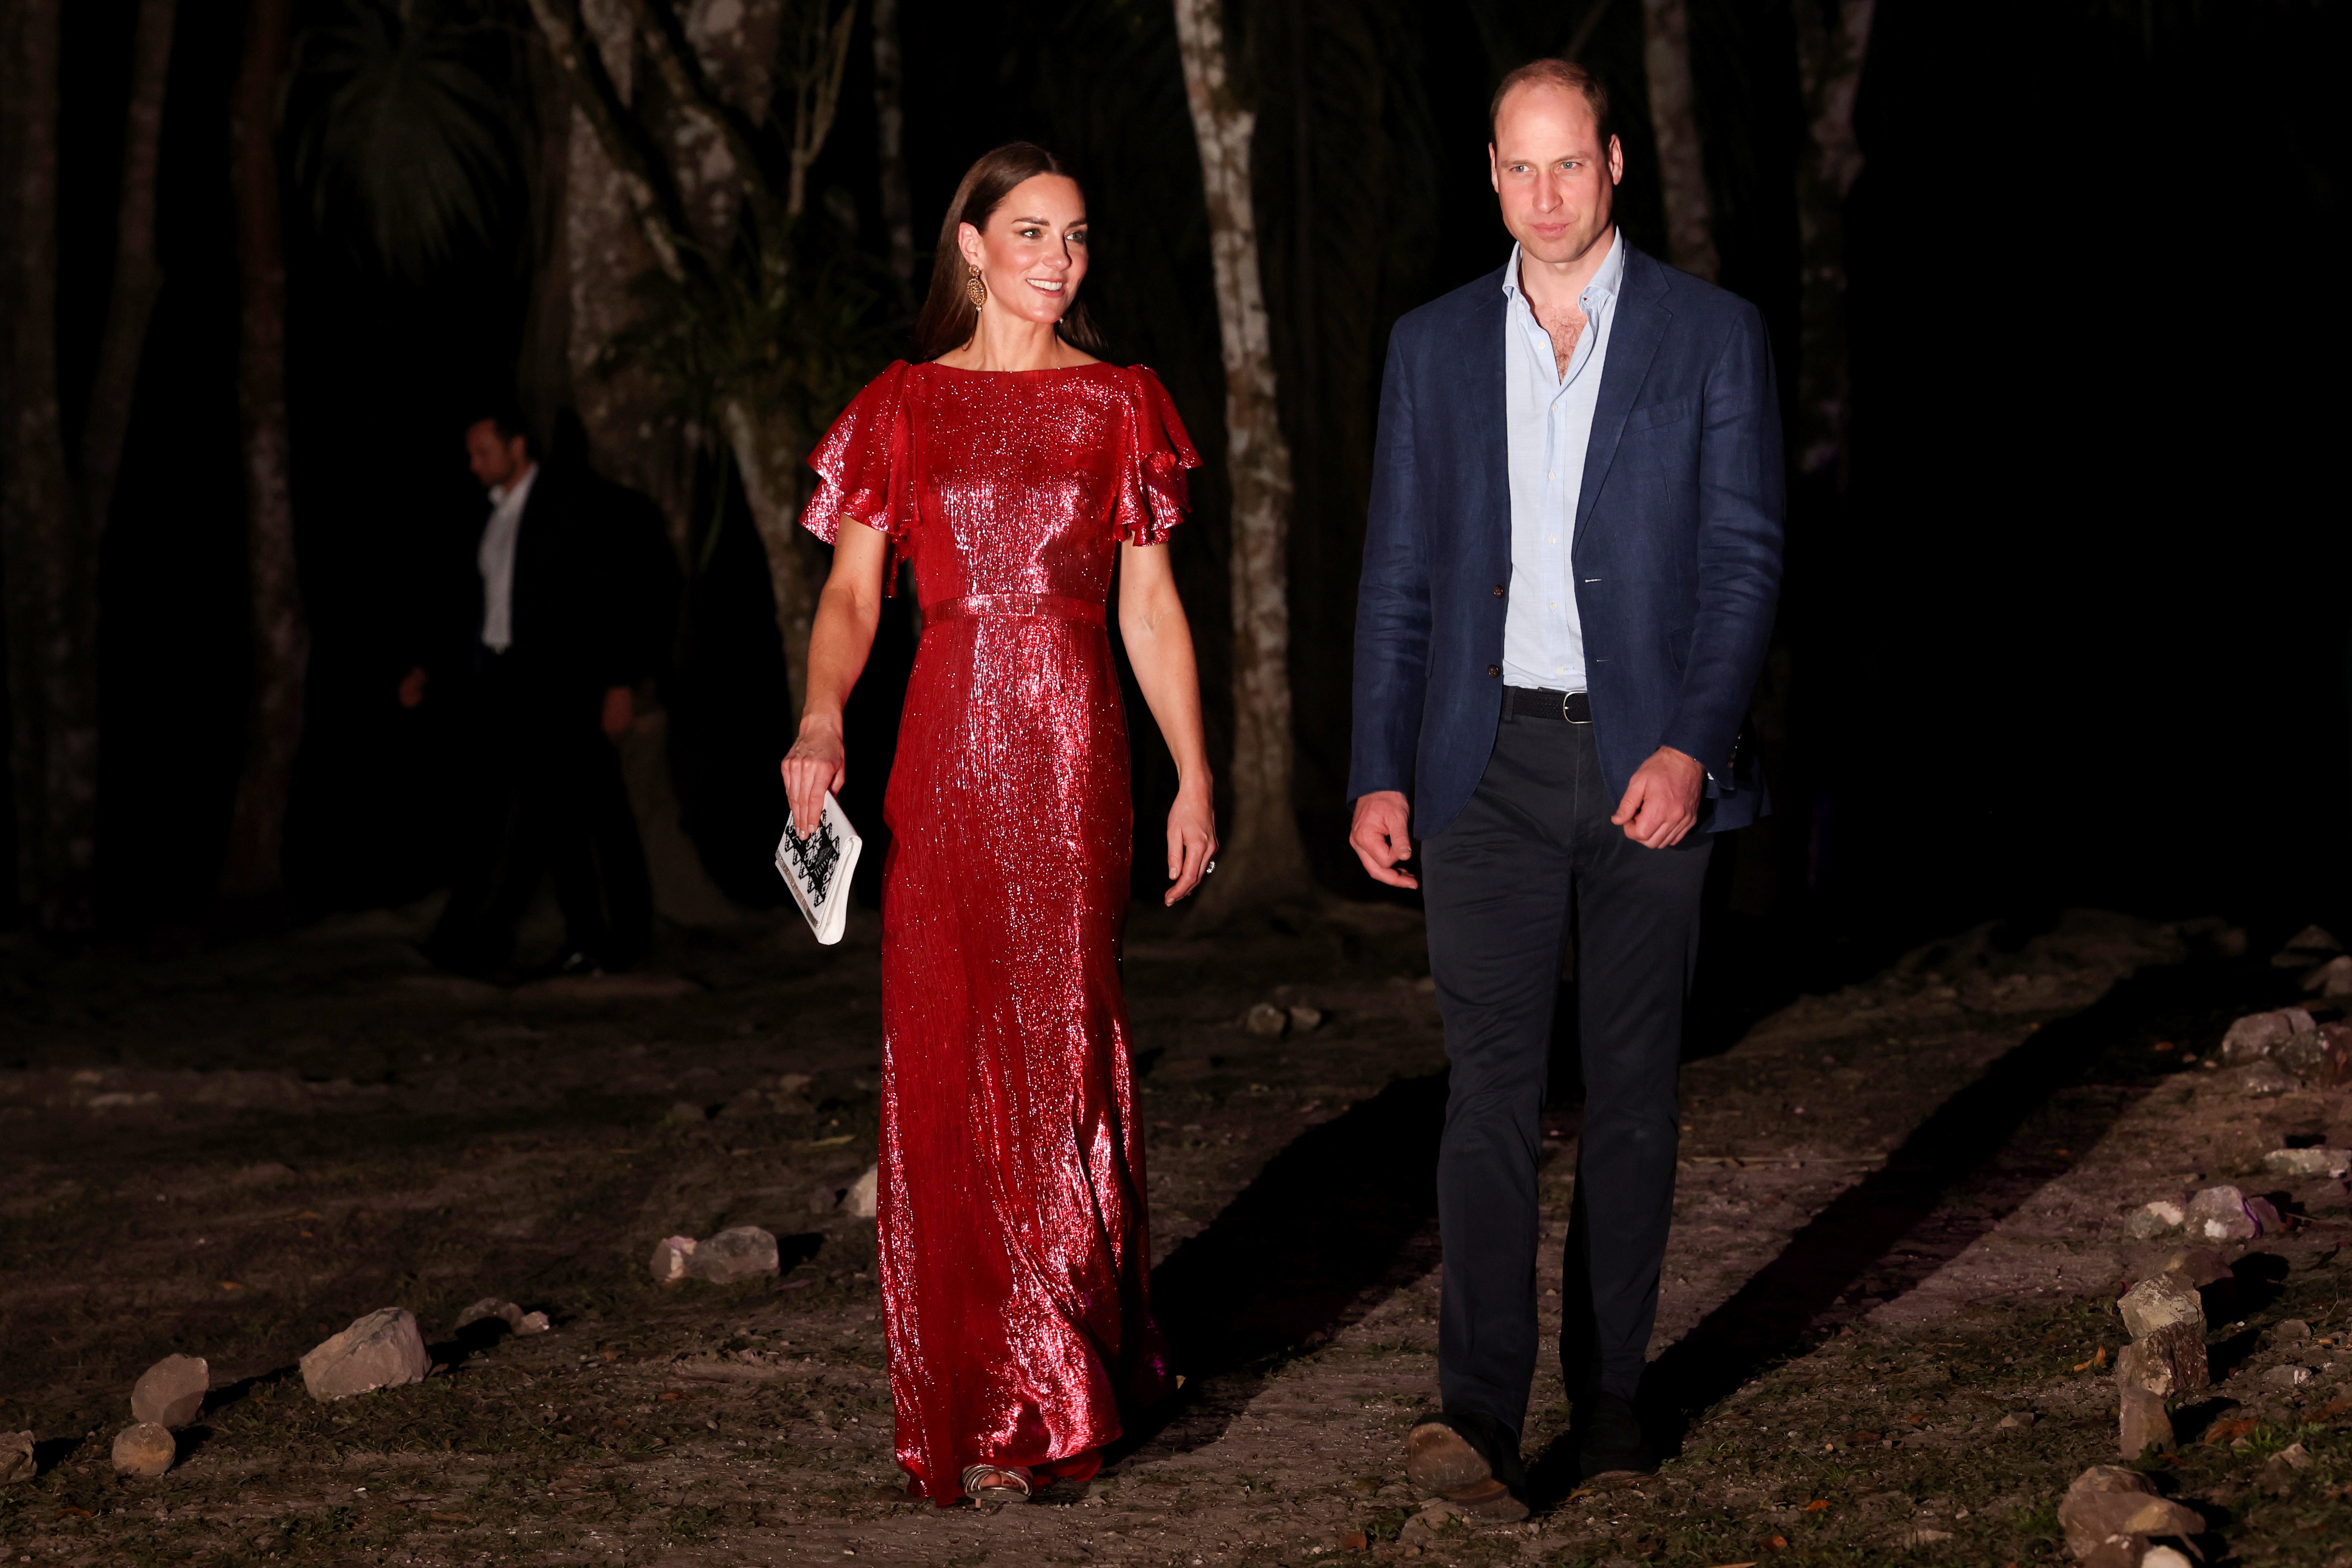 Prince William, Duke of Cambridge and Catherine, Duchess of Cambridge attend a special reception hosted by the Governor General of Belize